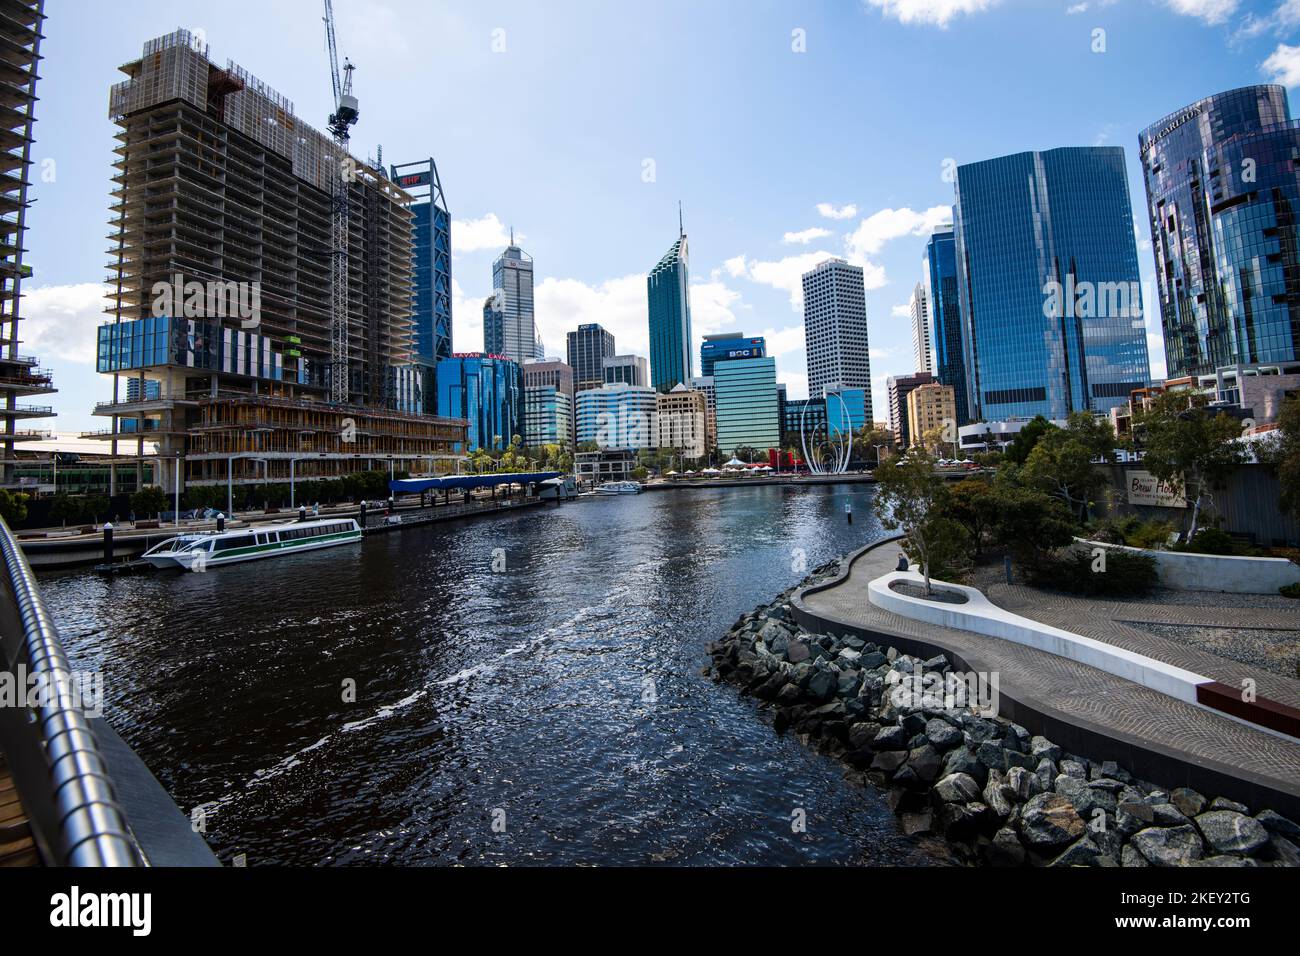 The financial, banking and mining headquarters of Perth, Western Australia seen from Queen Elizabeth Quay on the Swan River. Stock Photo